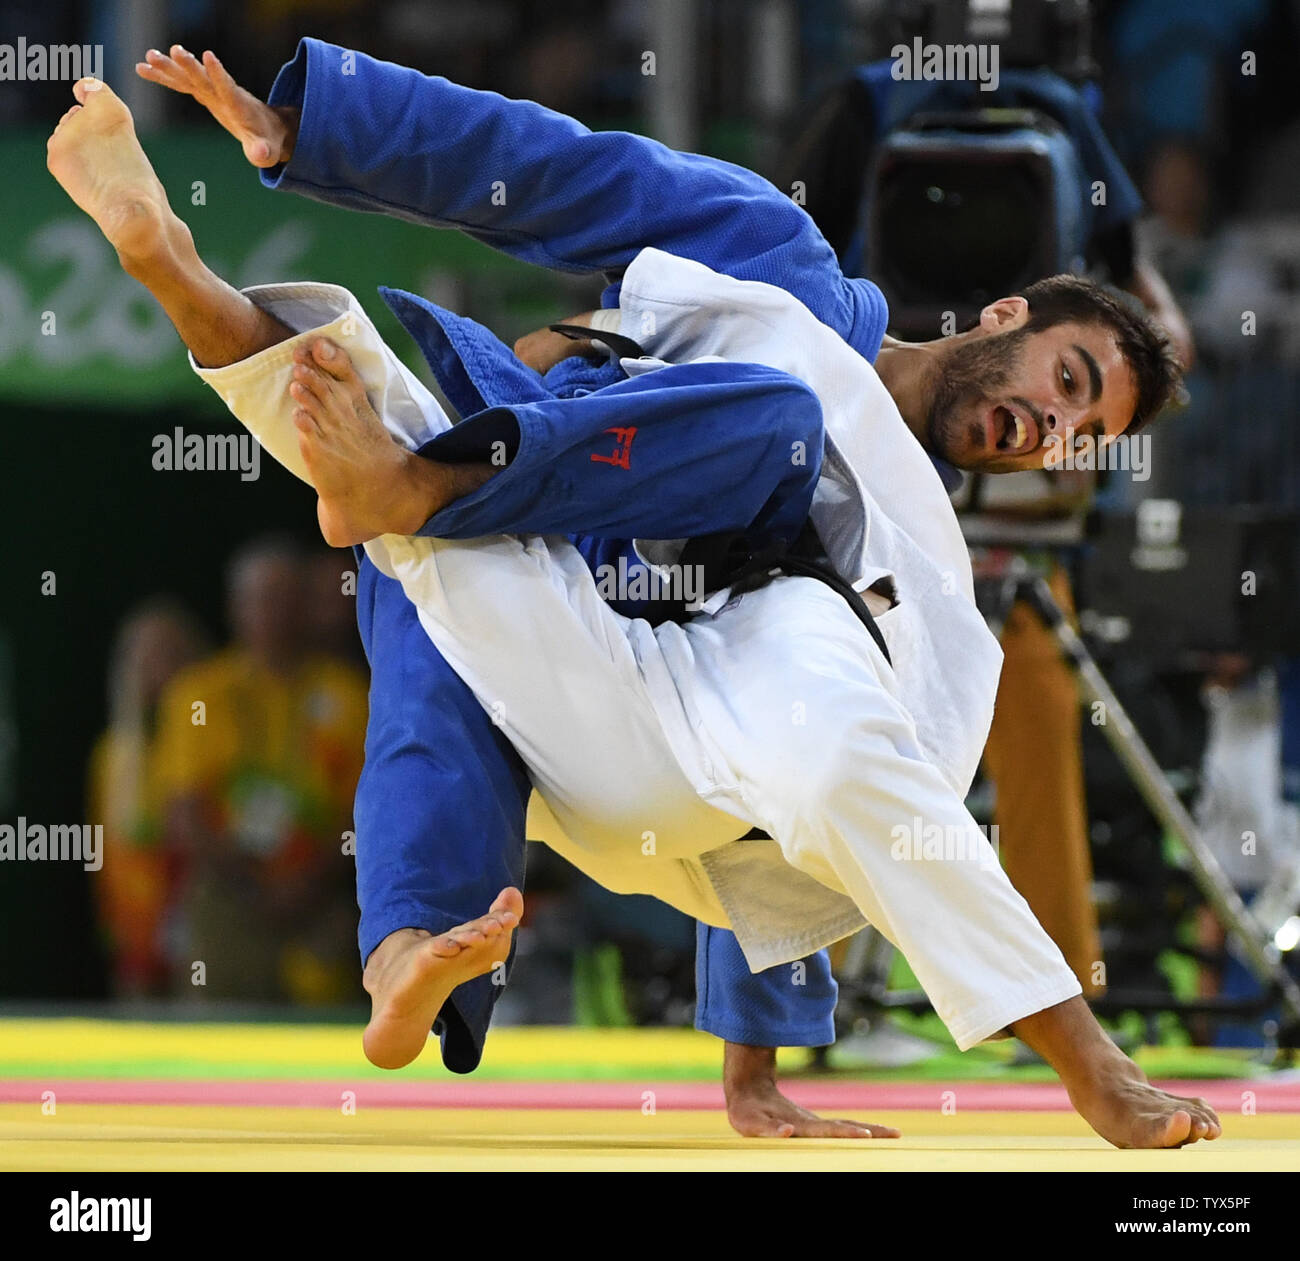 Antoine Bouchard of Canada tangles with Tumurkhuleg Davaadorj of Mongolia in 66KG Judo at the 2016 Rio Summer Olympics in Rio de Janeiro, Brazil, on August 7, 2016. Bouchard won the match.  Photo by Terry Schmitt/UPI Stock Photo